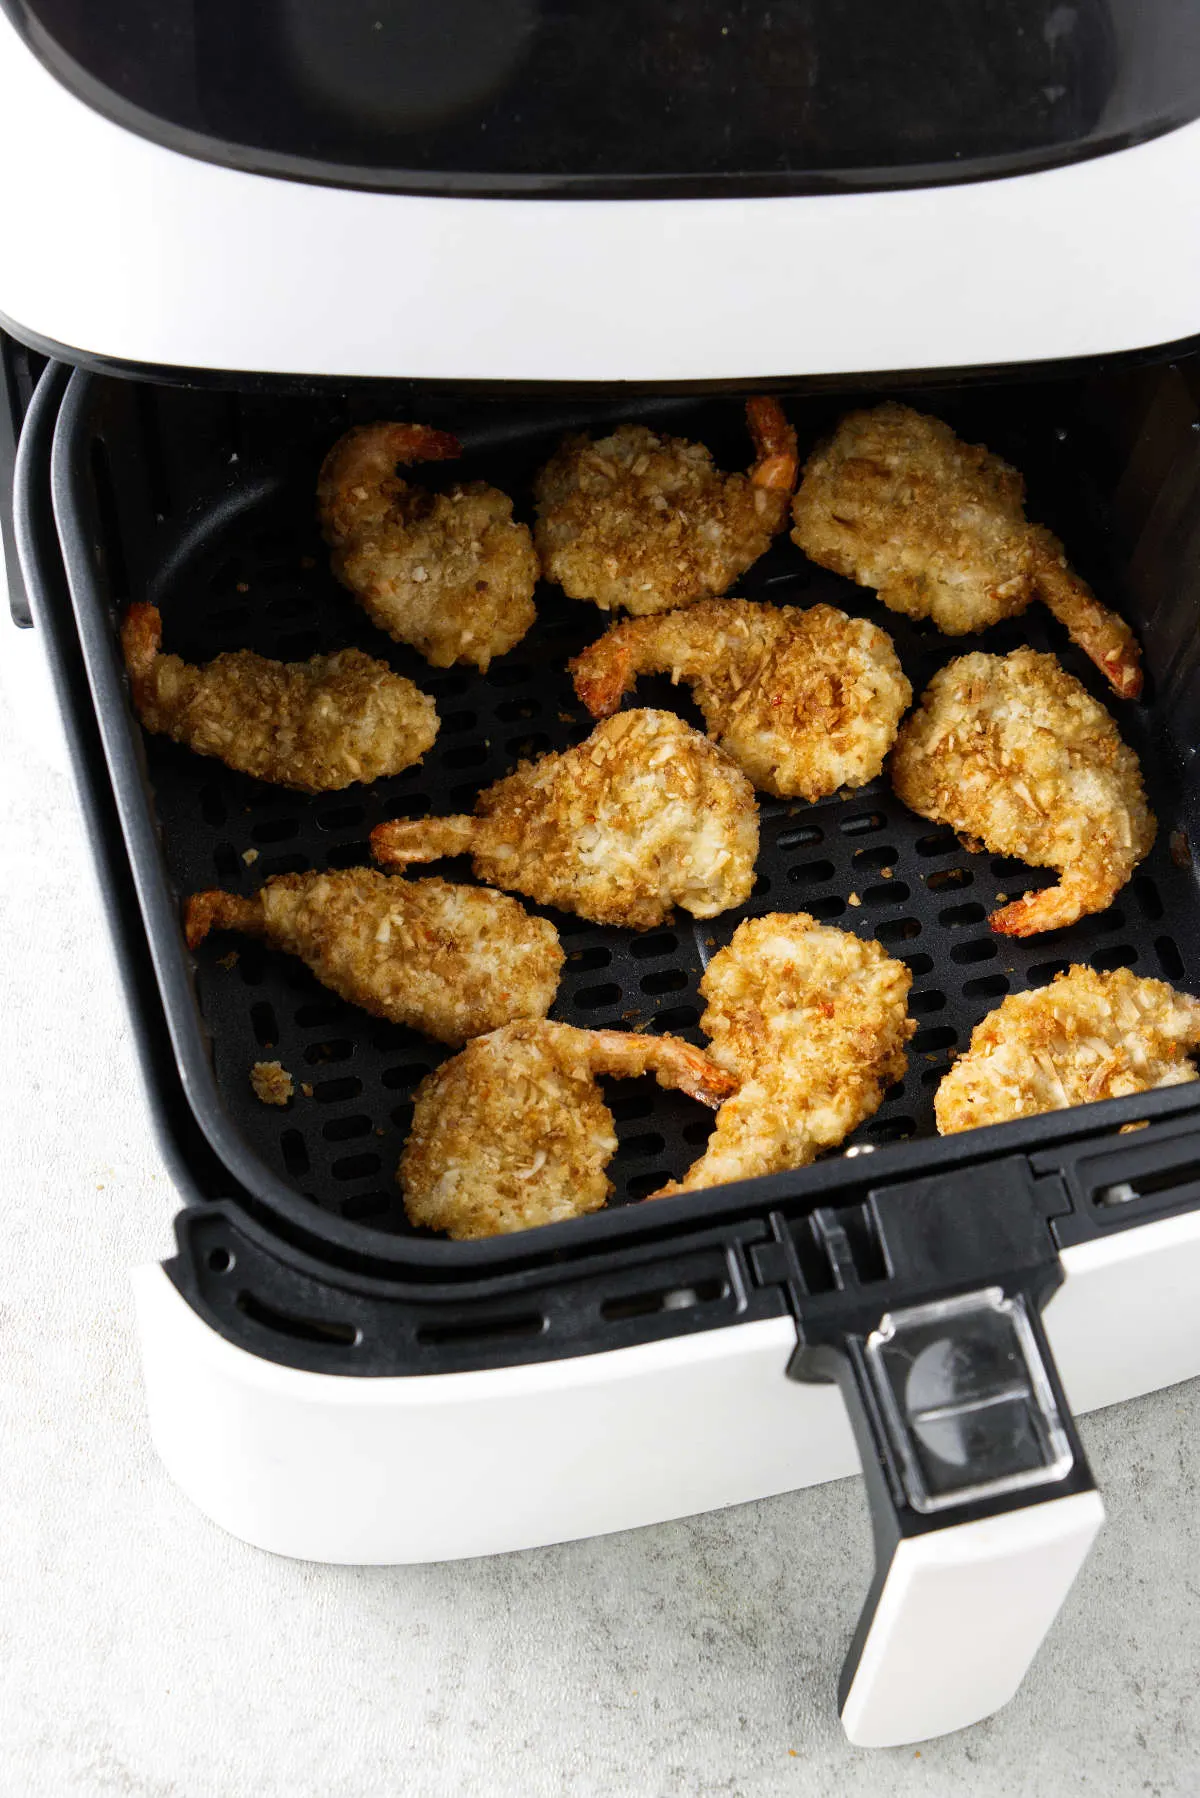 Breaded shrimp cooking in an air fryer.